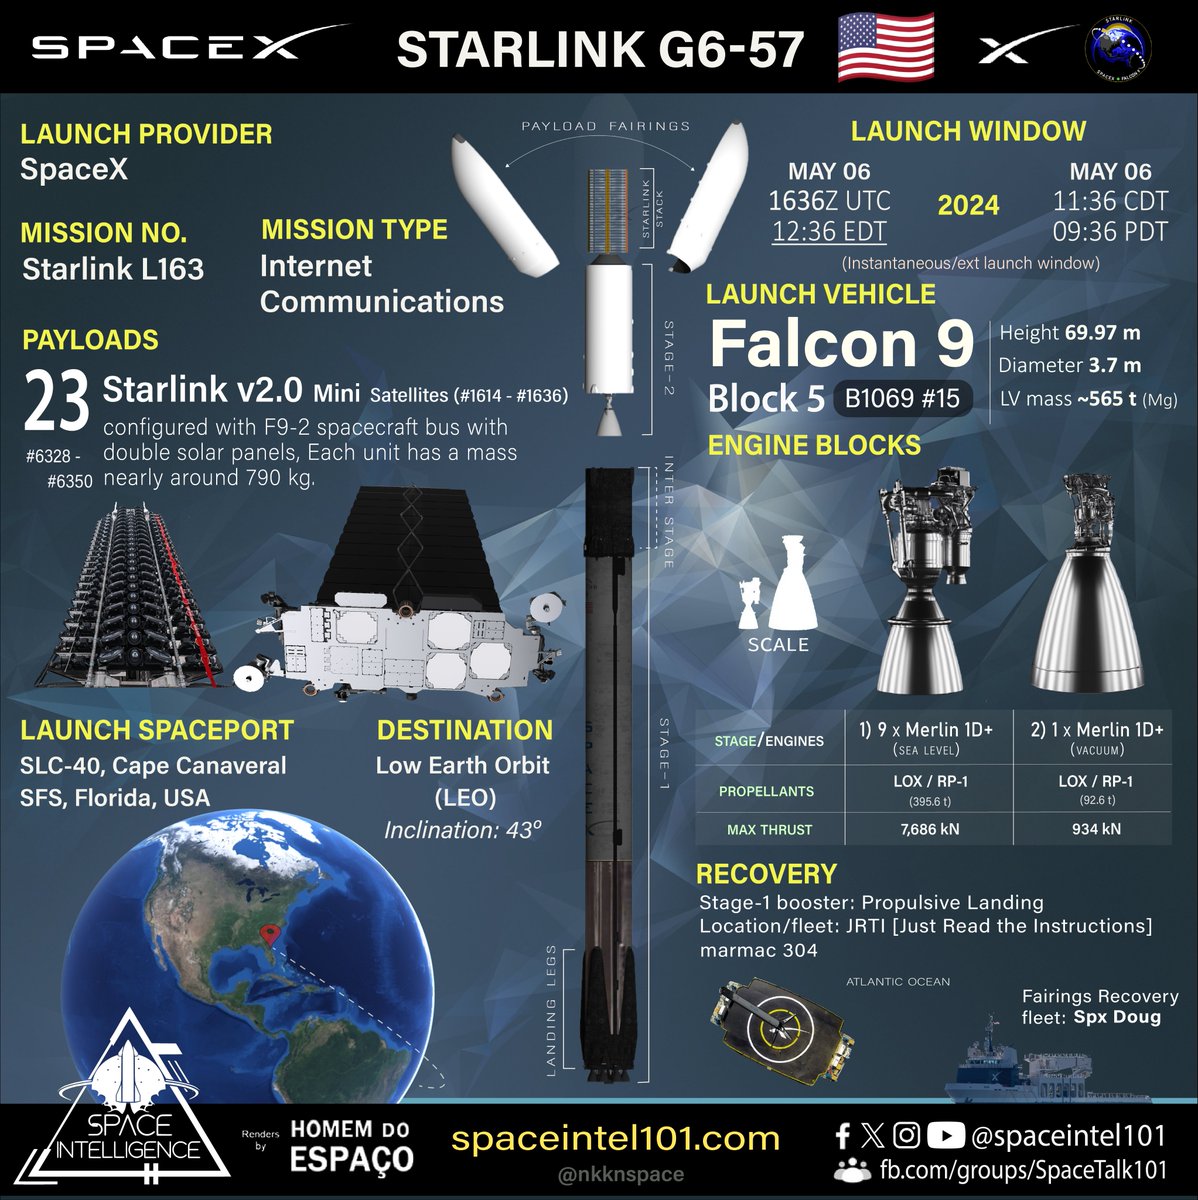 Orbital launch no. 85 of 2024 🇺🇲🚀⭐🔗🛰️➕

Starlink L163 | SpaceX | May 06 | 1636 UTC

@SpaceX's 31th #Starlink mission of 2024 to launch 23 v2.0 @Starlink Mini🛰️ on its #Falcon9 #B1069.15🚀 to 43° Low Earth Orbit from @SLDelta45 SLC-40, Cape Canaveral.
#SpaceX #capecanaveral…